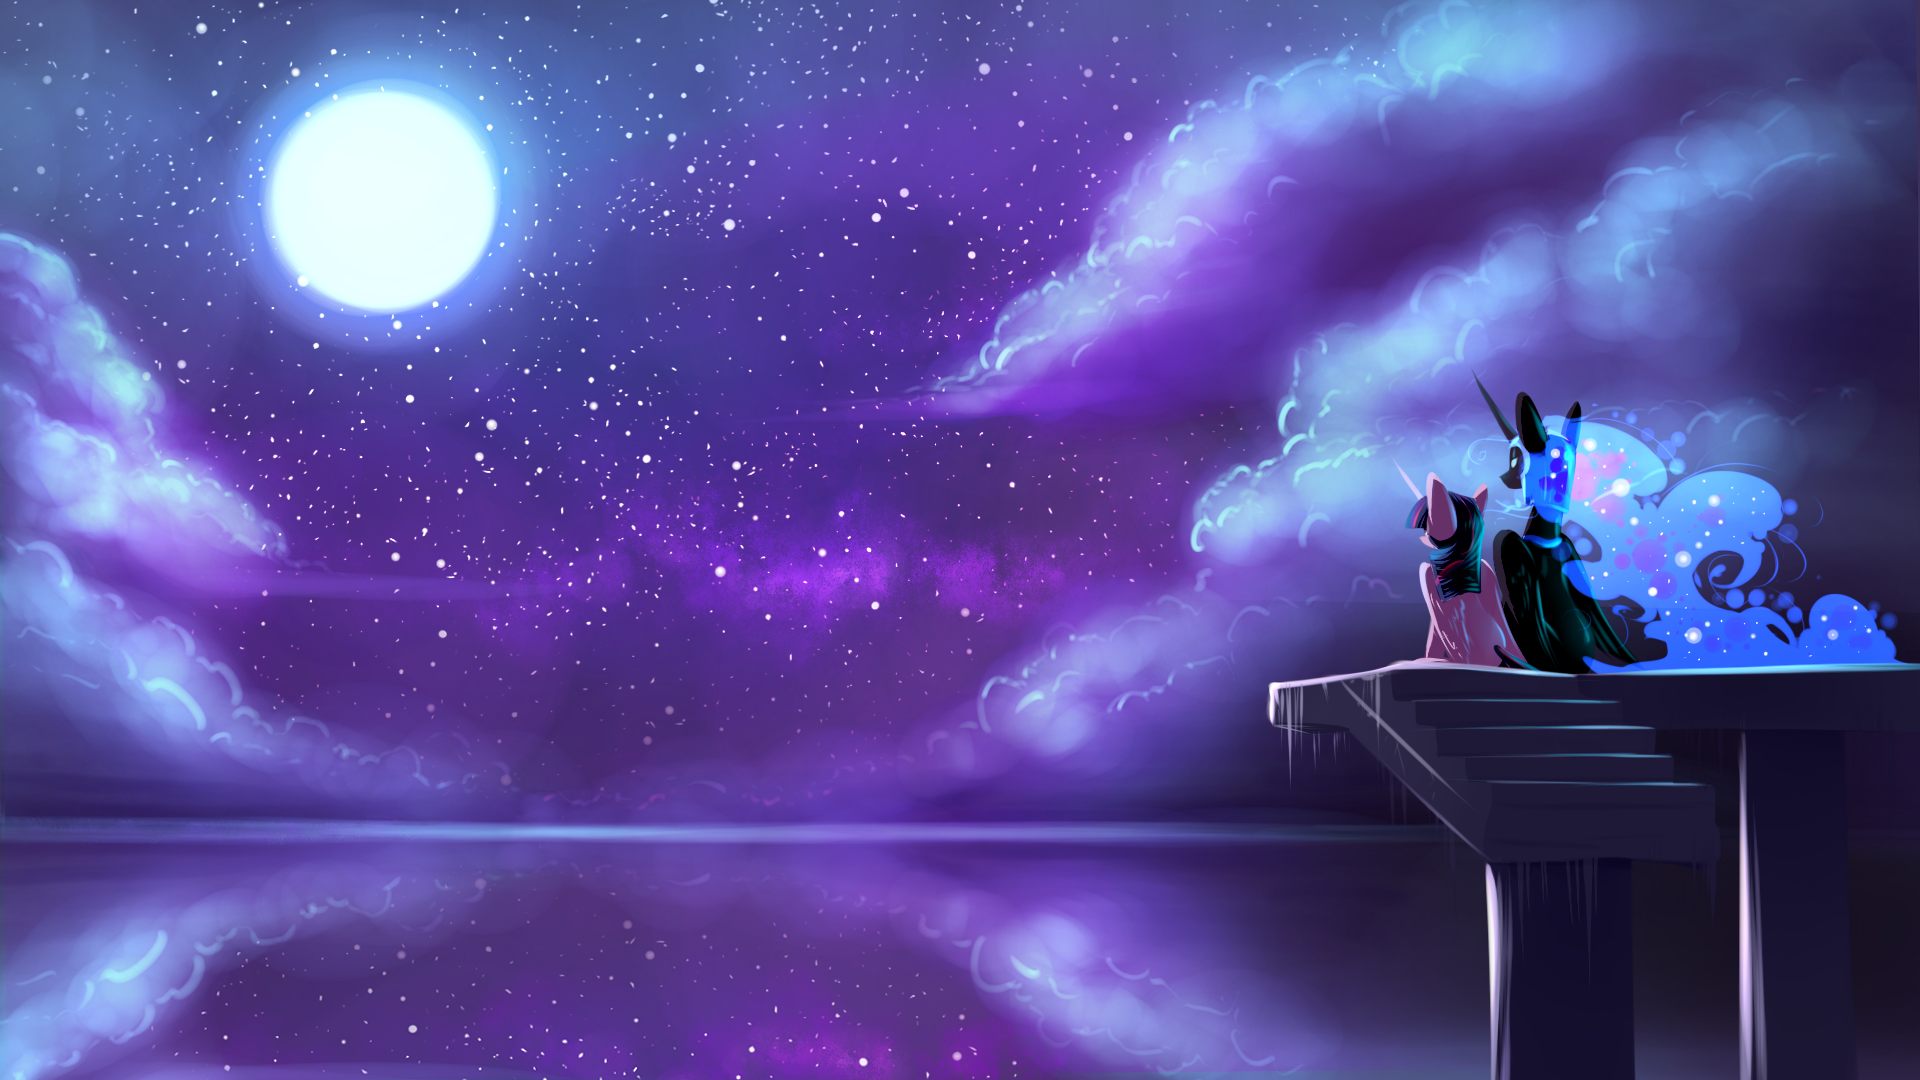 Night Sky by Underpable